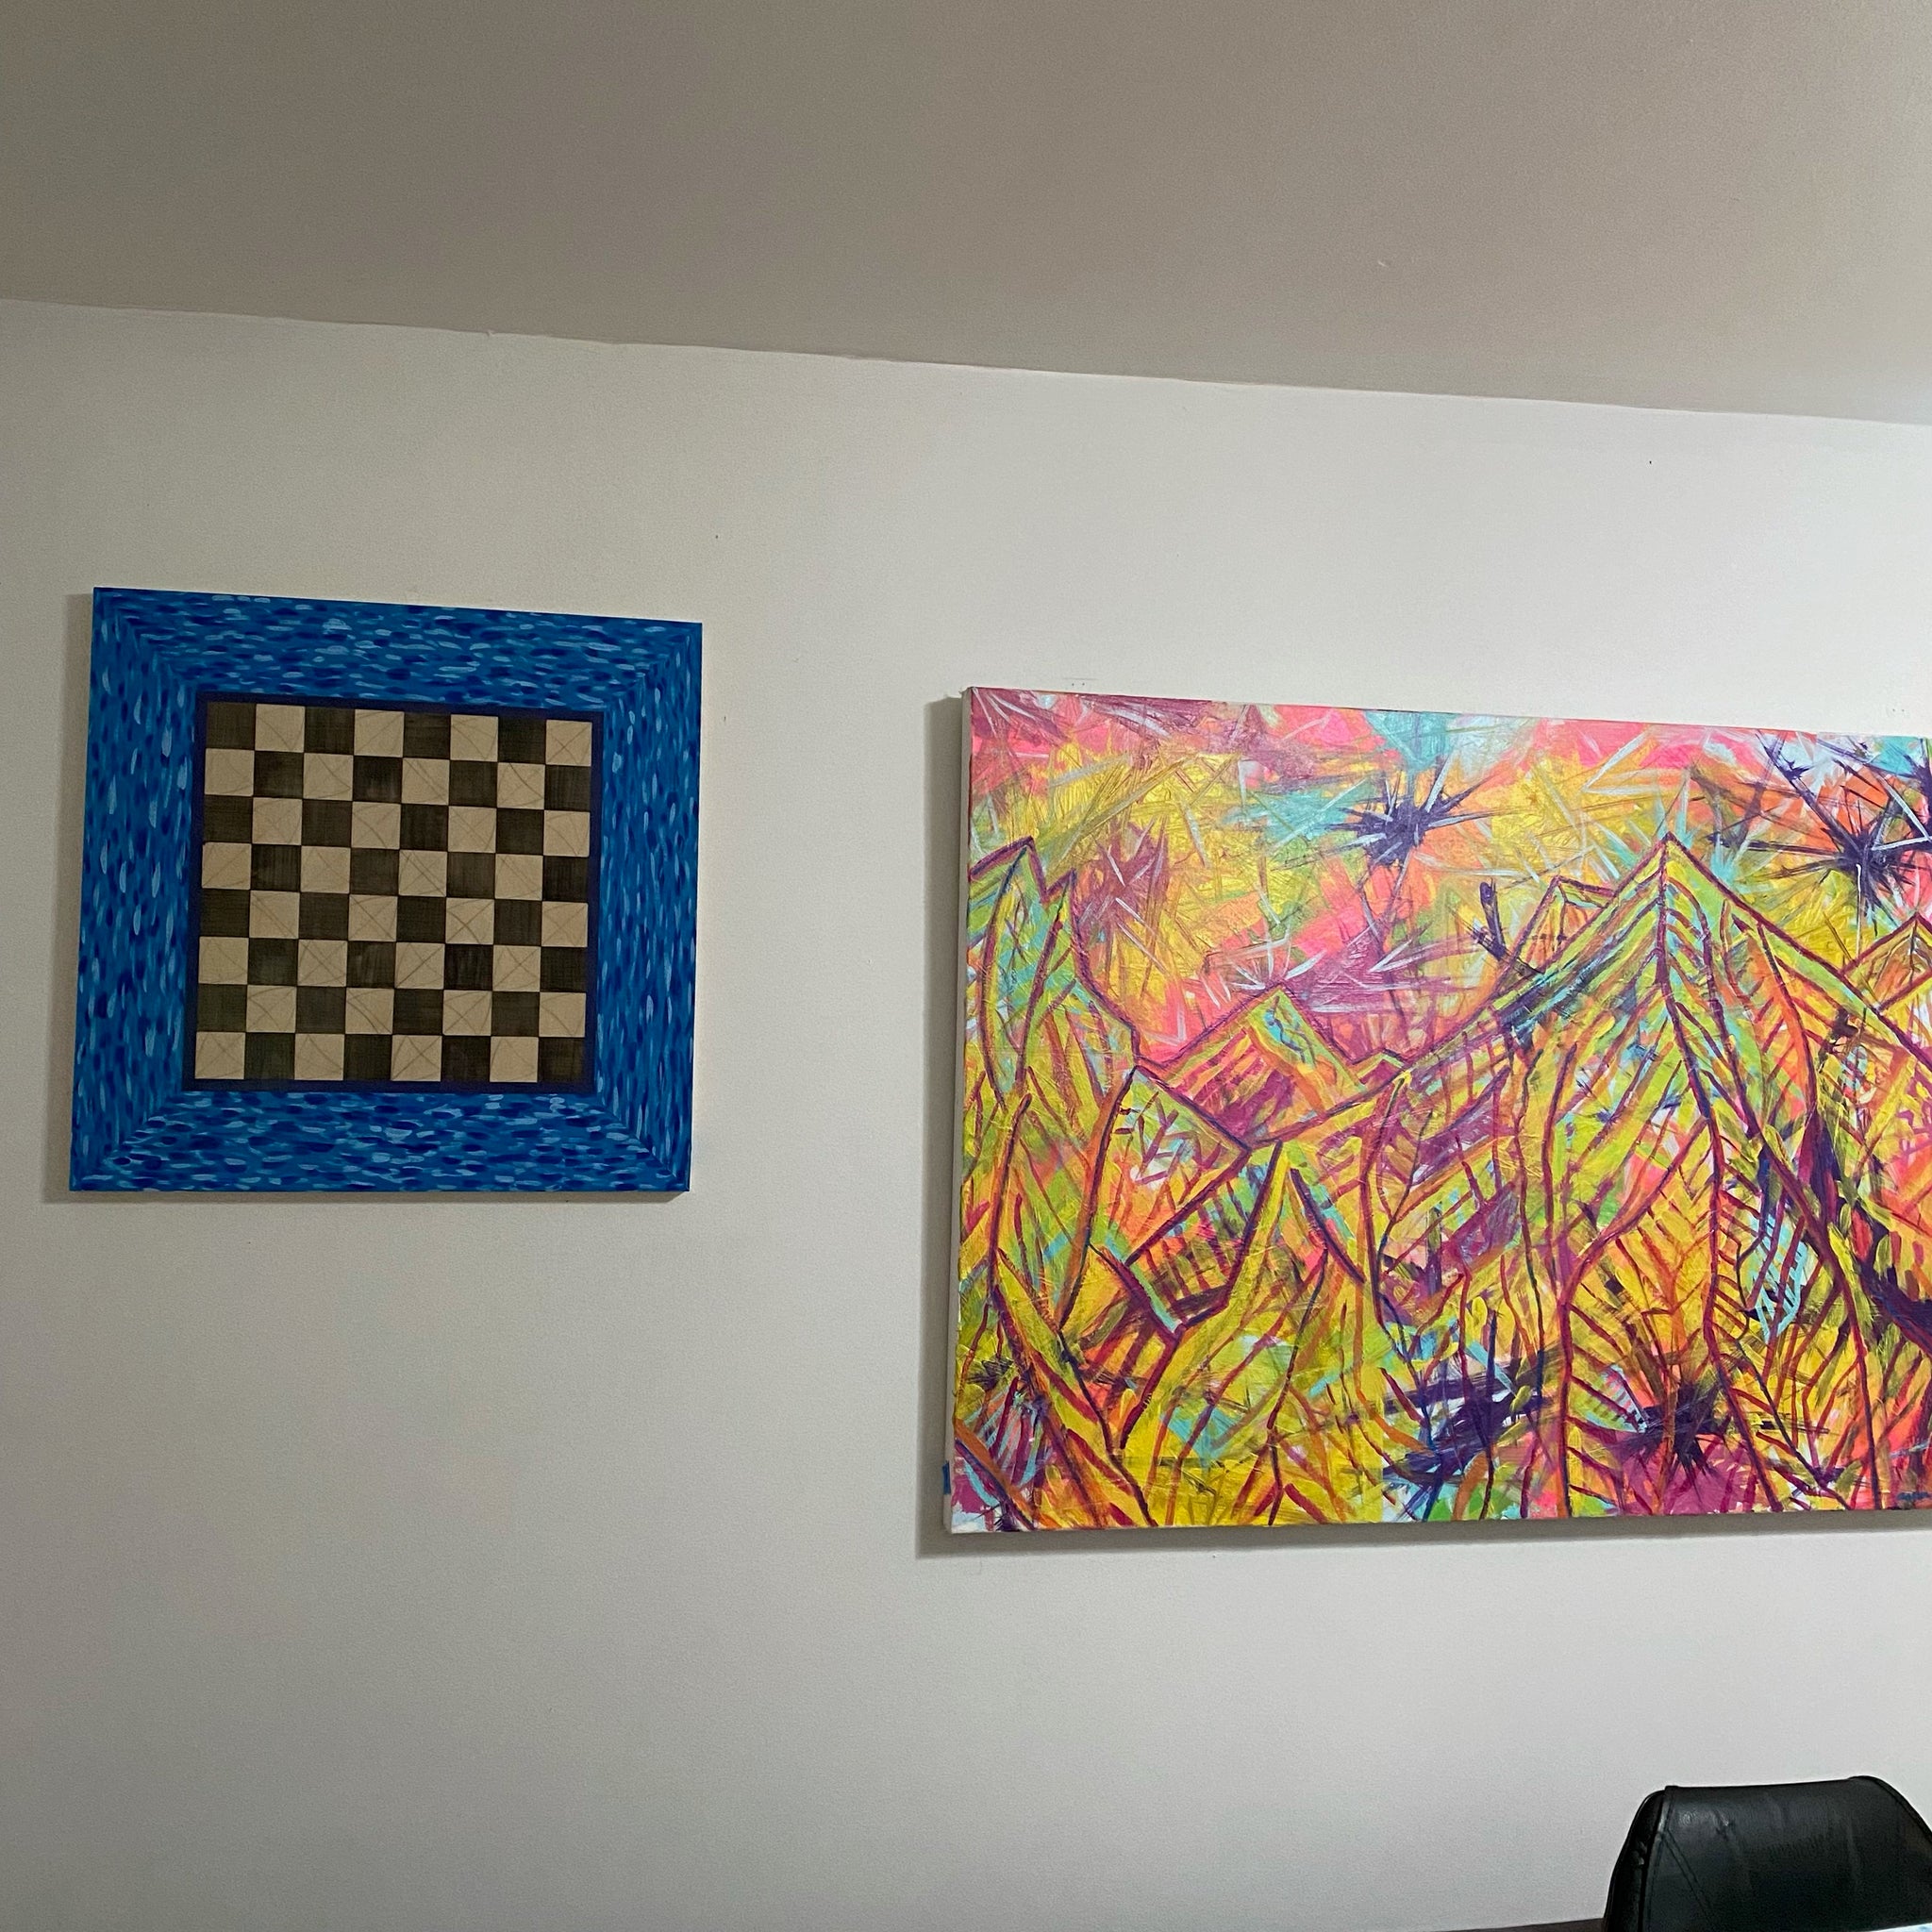 Can I Play Chess on This? (20" x 20")